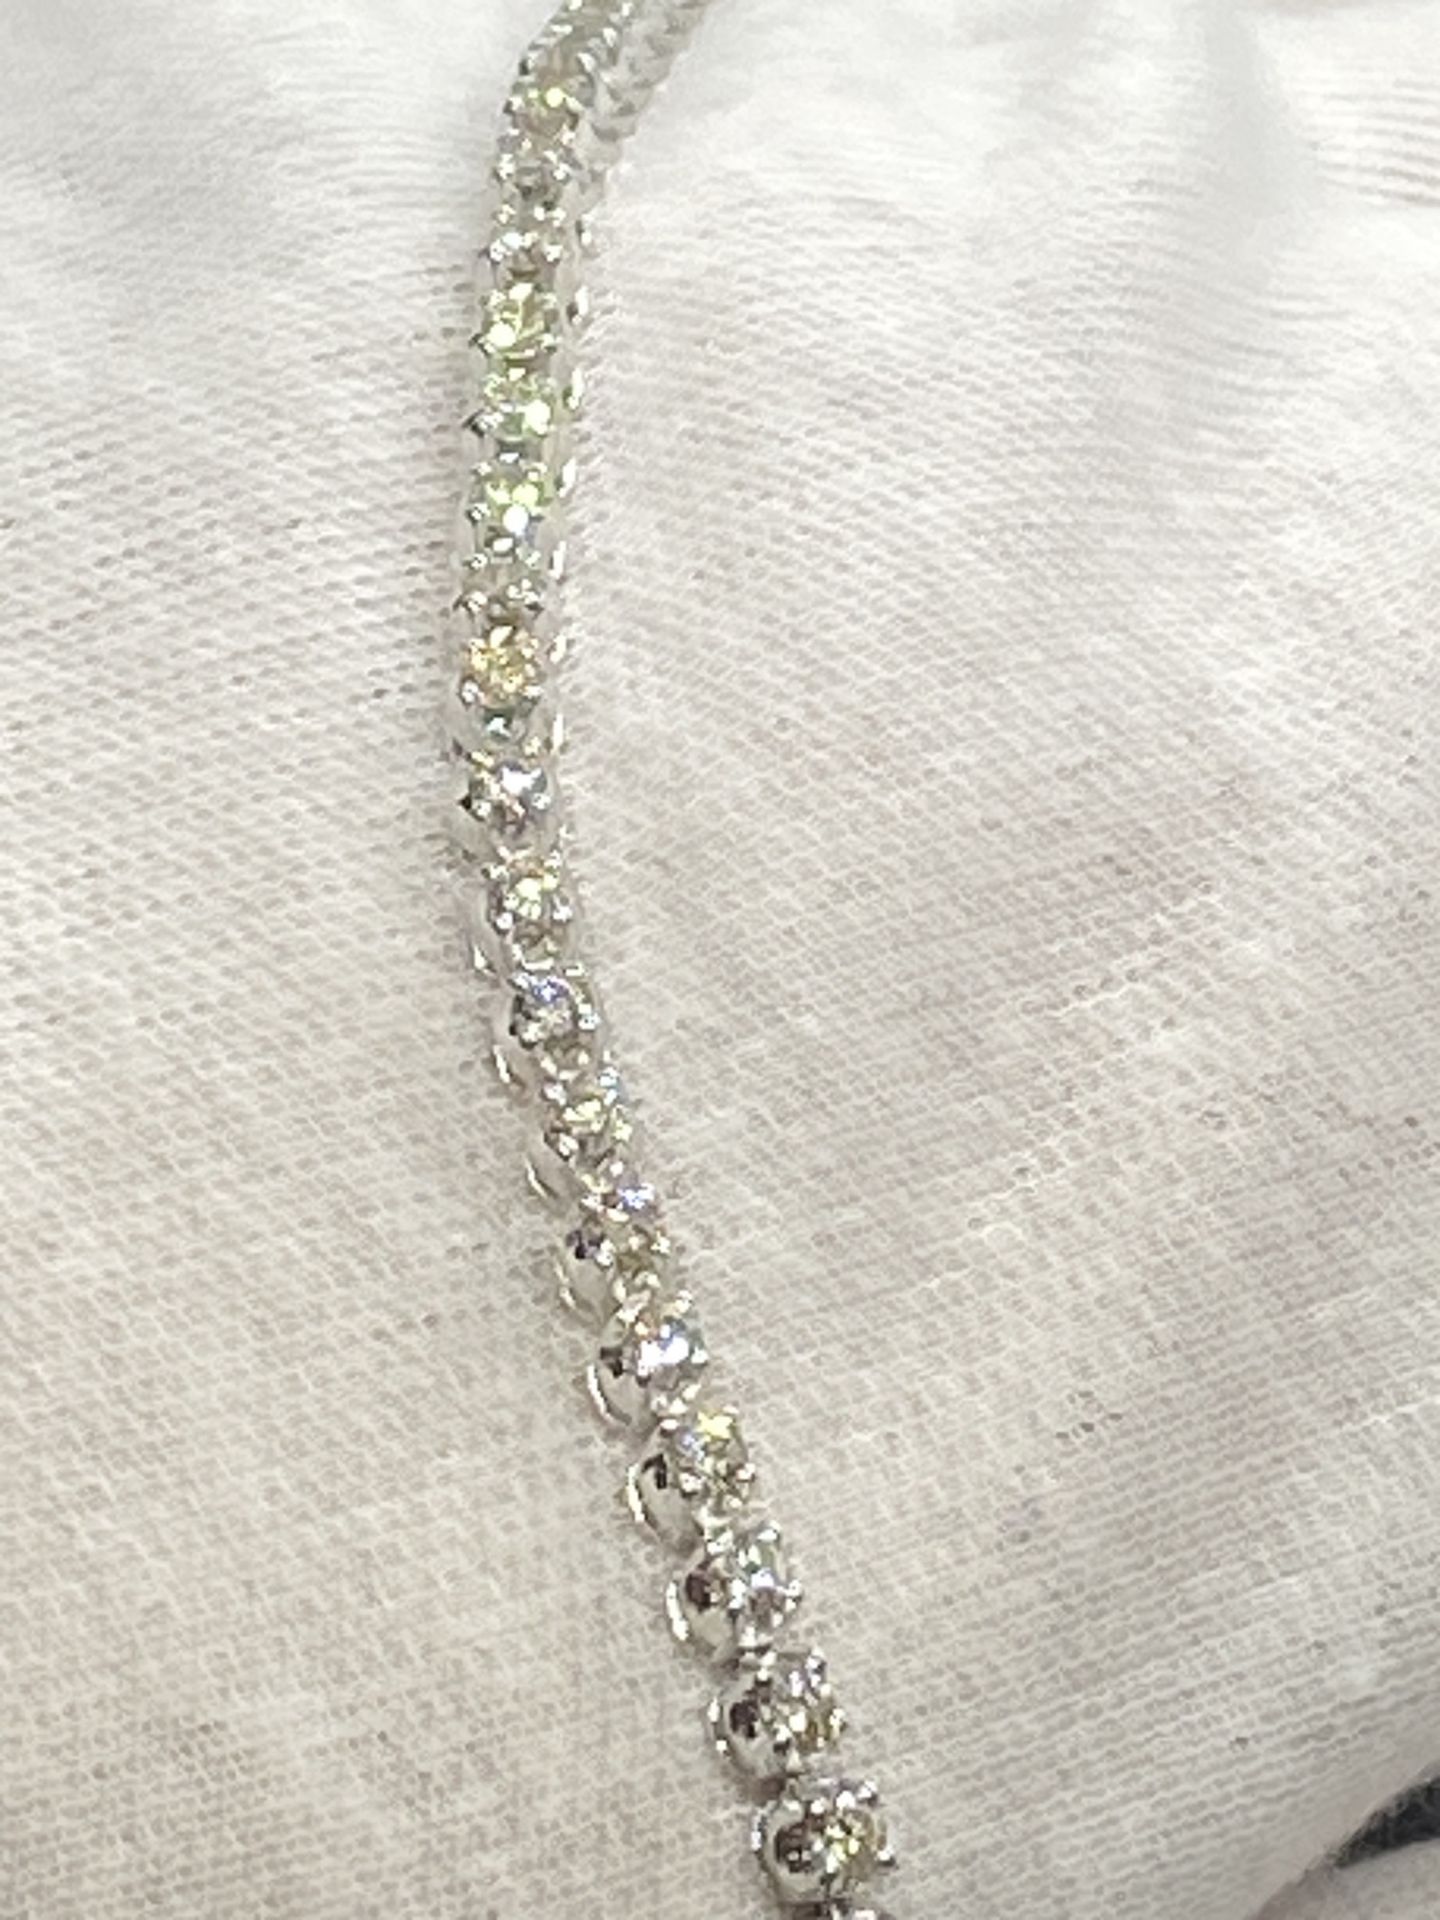 4.00ct NATURAL DIAMOND TENNIS BRACELET SET WHITE GOLD - F/G/H SI1 WITH £5800 INSURANCE VALUATION - Image 3 of 3